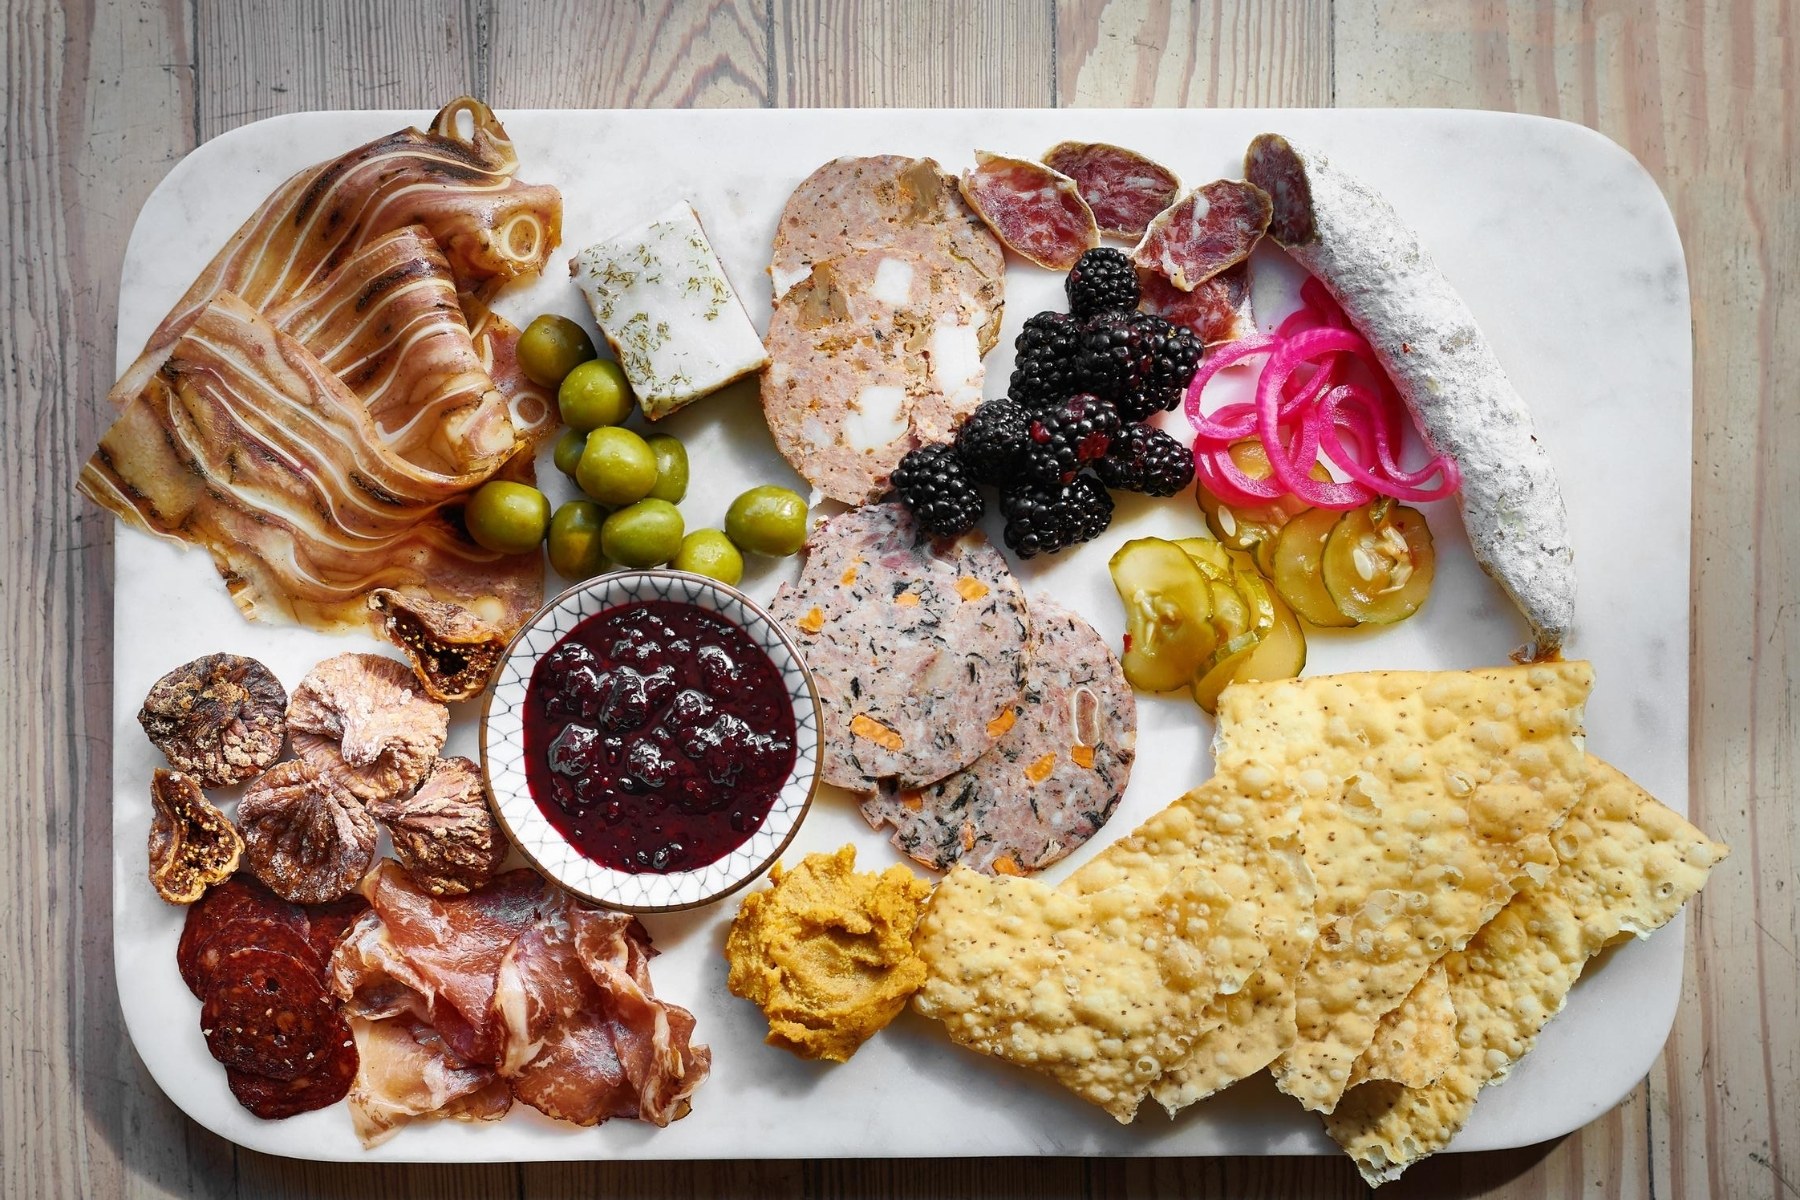 A packed charcuterie board topped with green olives, large seedy crackers, pickles, salumi, and other various cured meats.